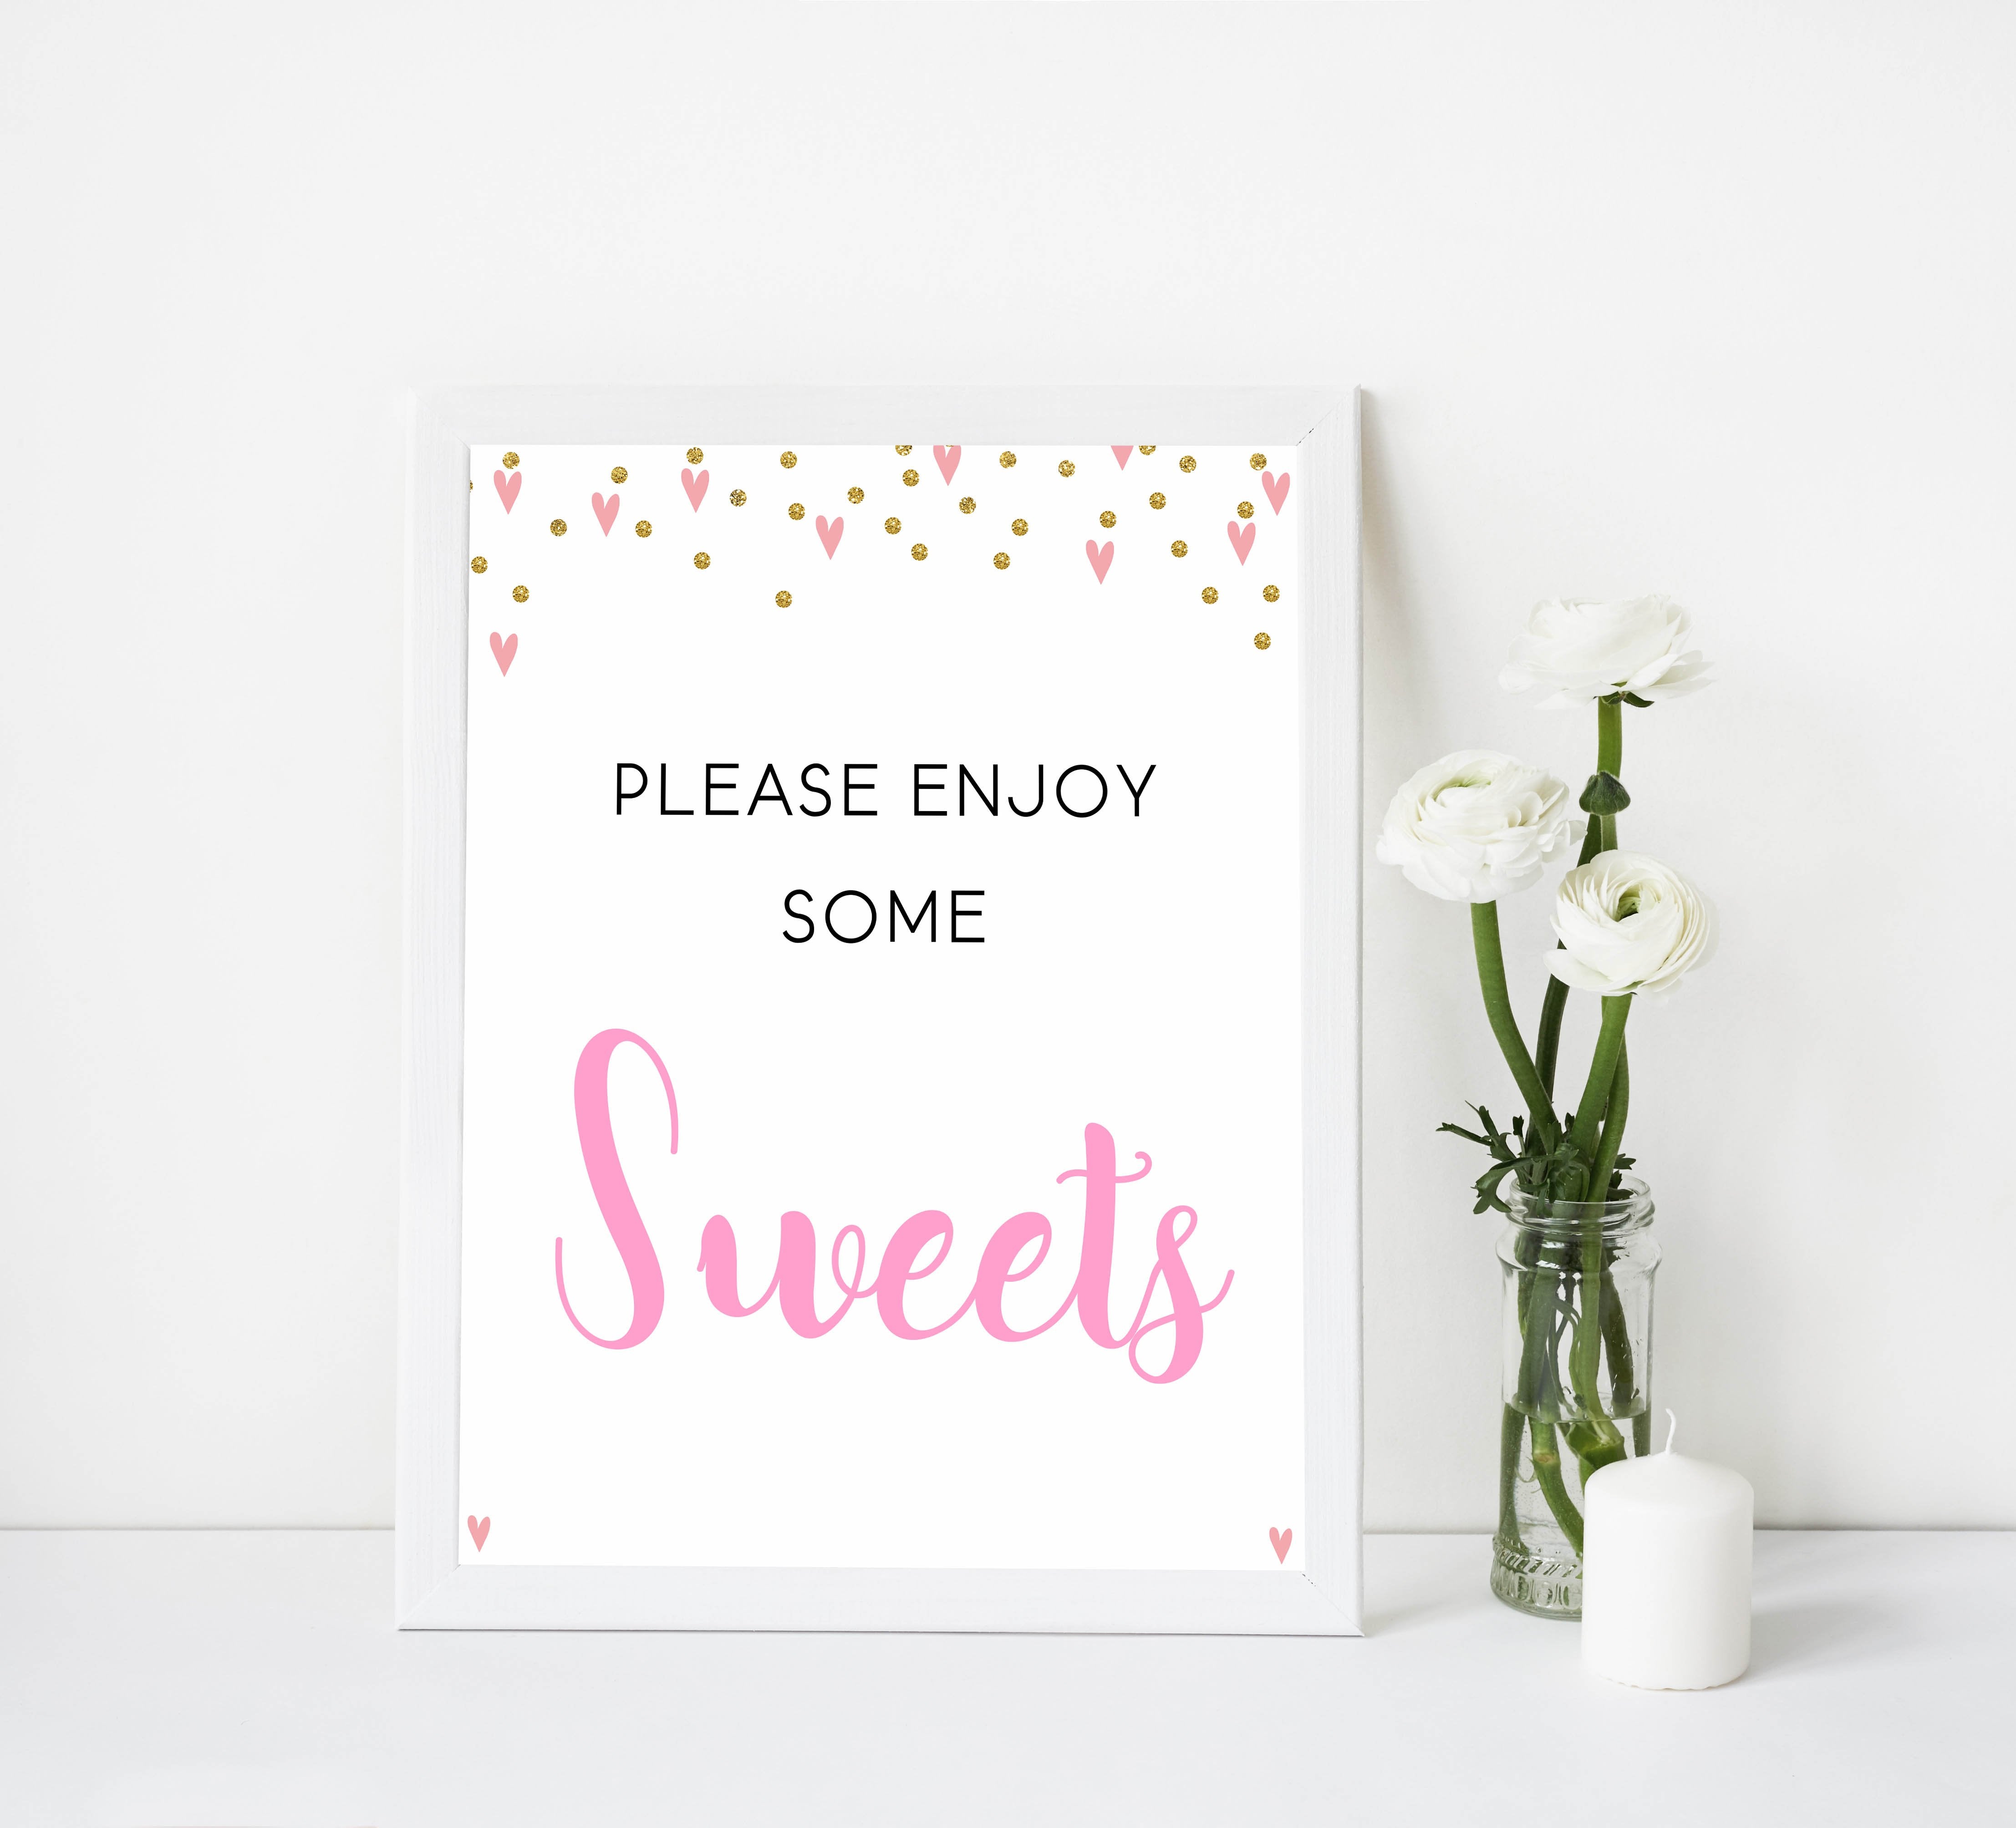 8 baby shower signs pack, 8 baby table signs, Pink hearts baby decor, printable baby table signs, printable baby decor, gold glitter table signs, fun baby signs, pink hearts fun baby table signs